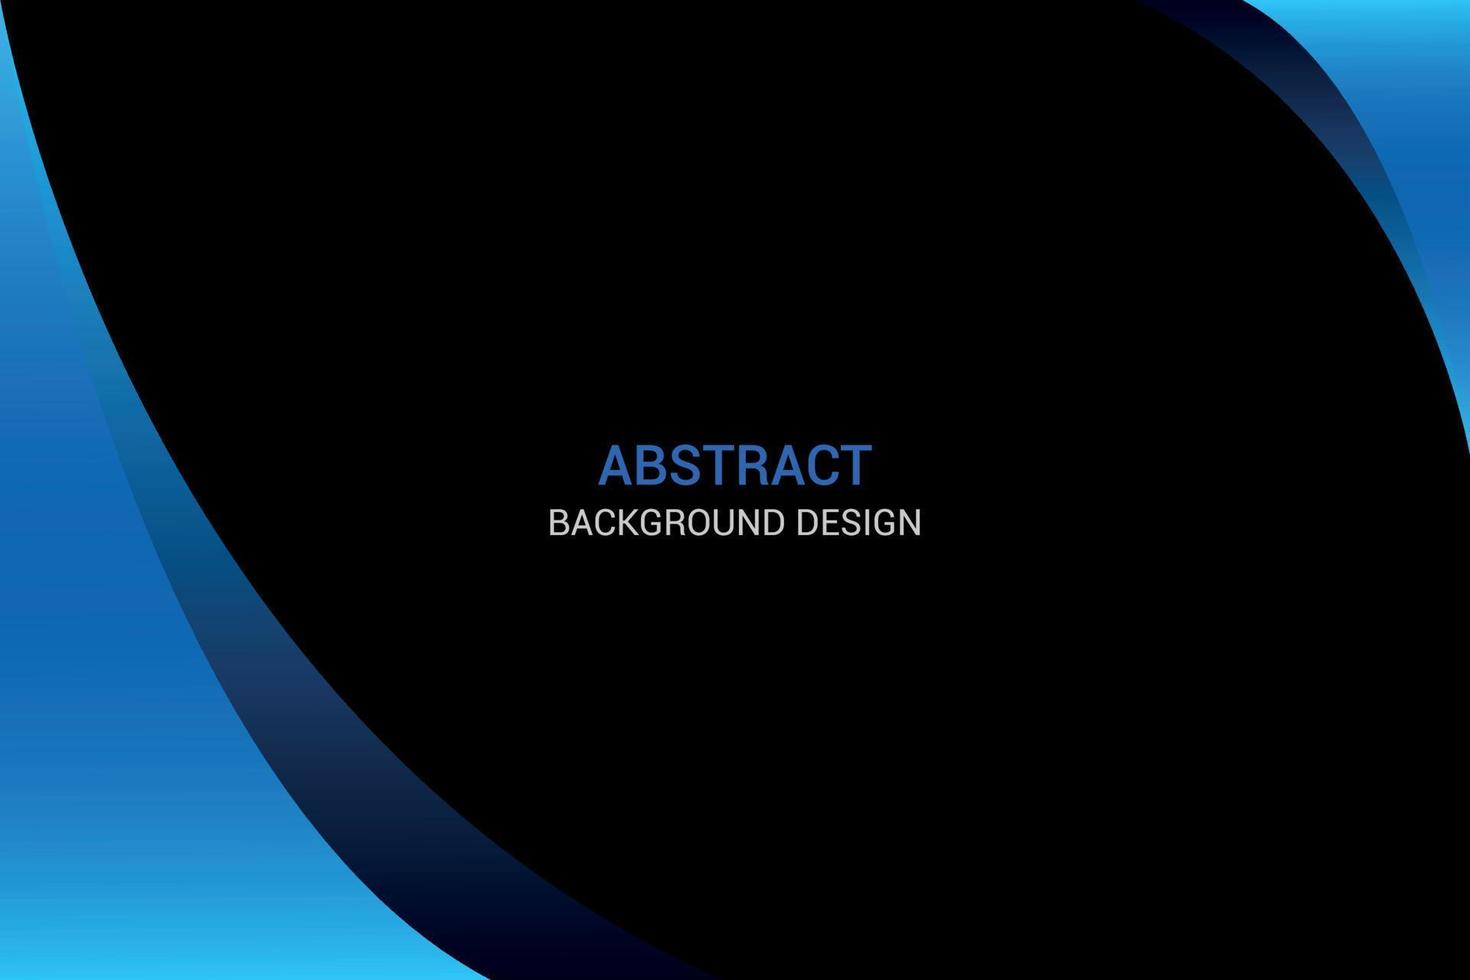 Abstract Vector Background Design.